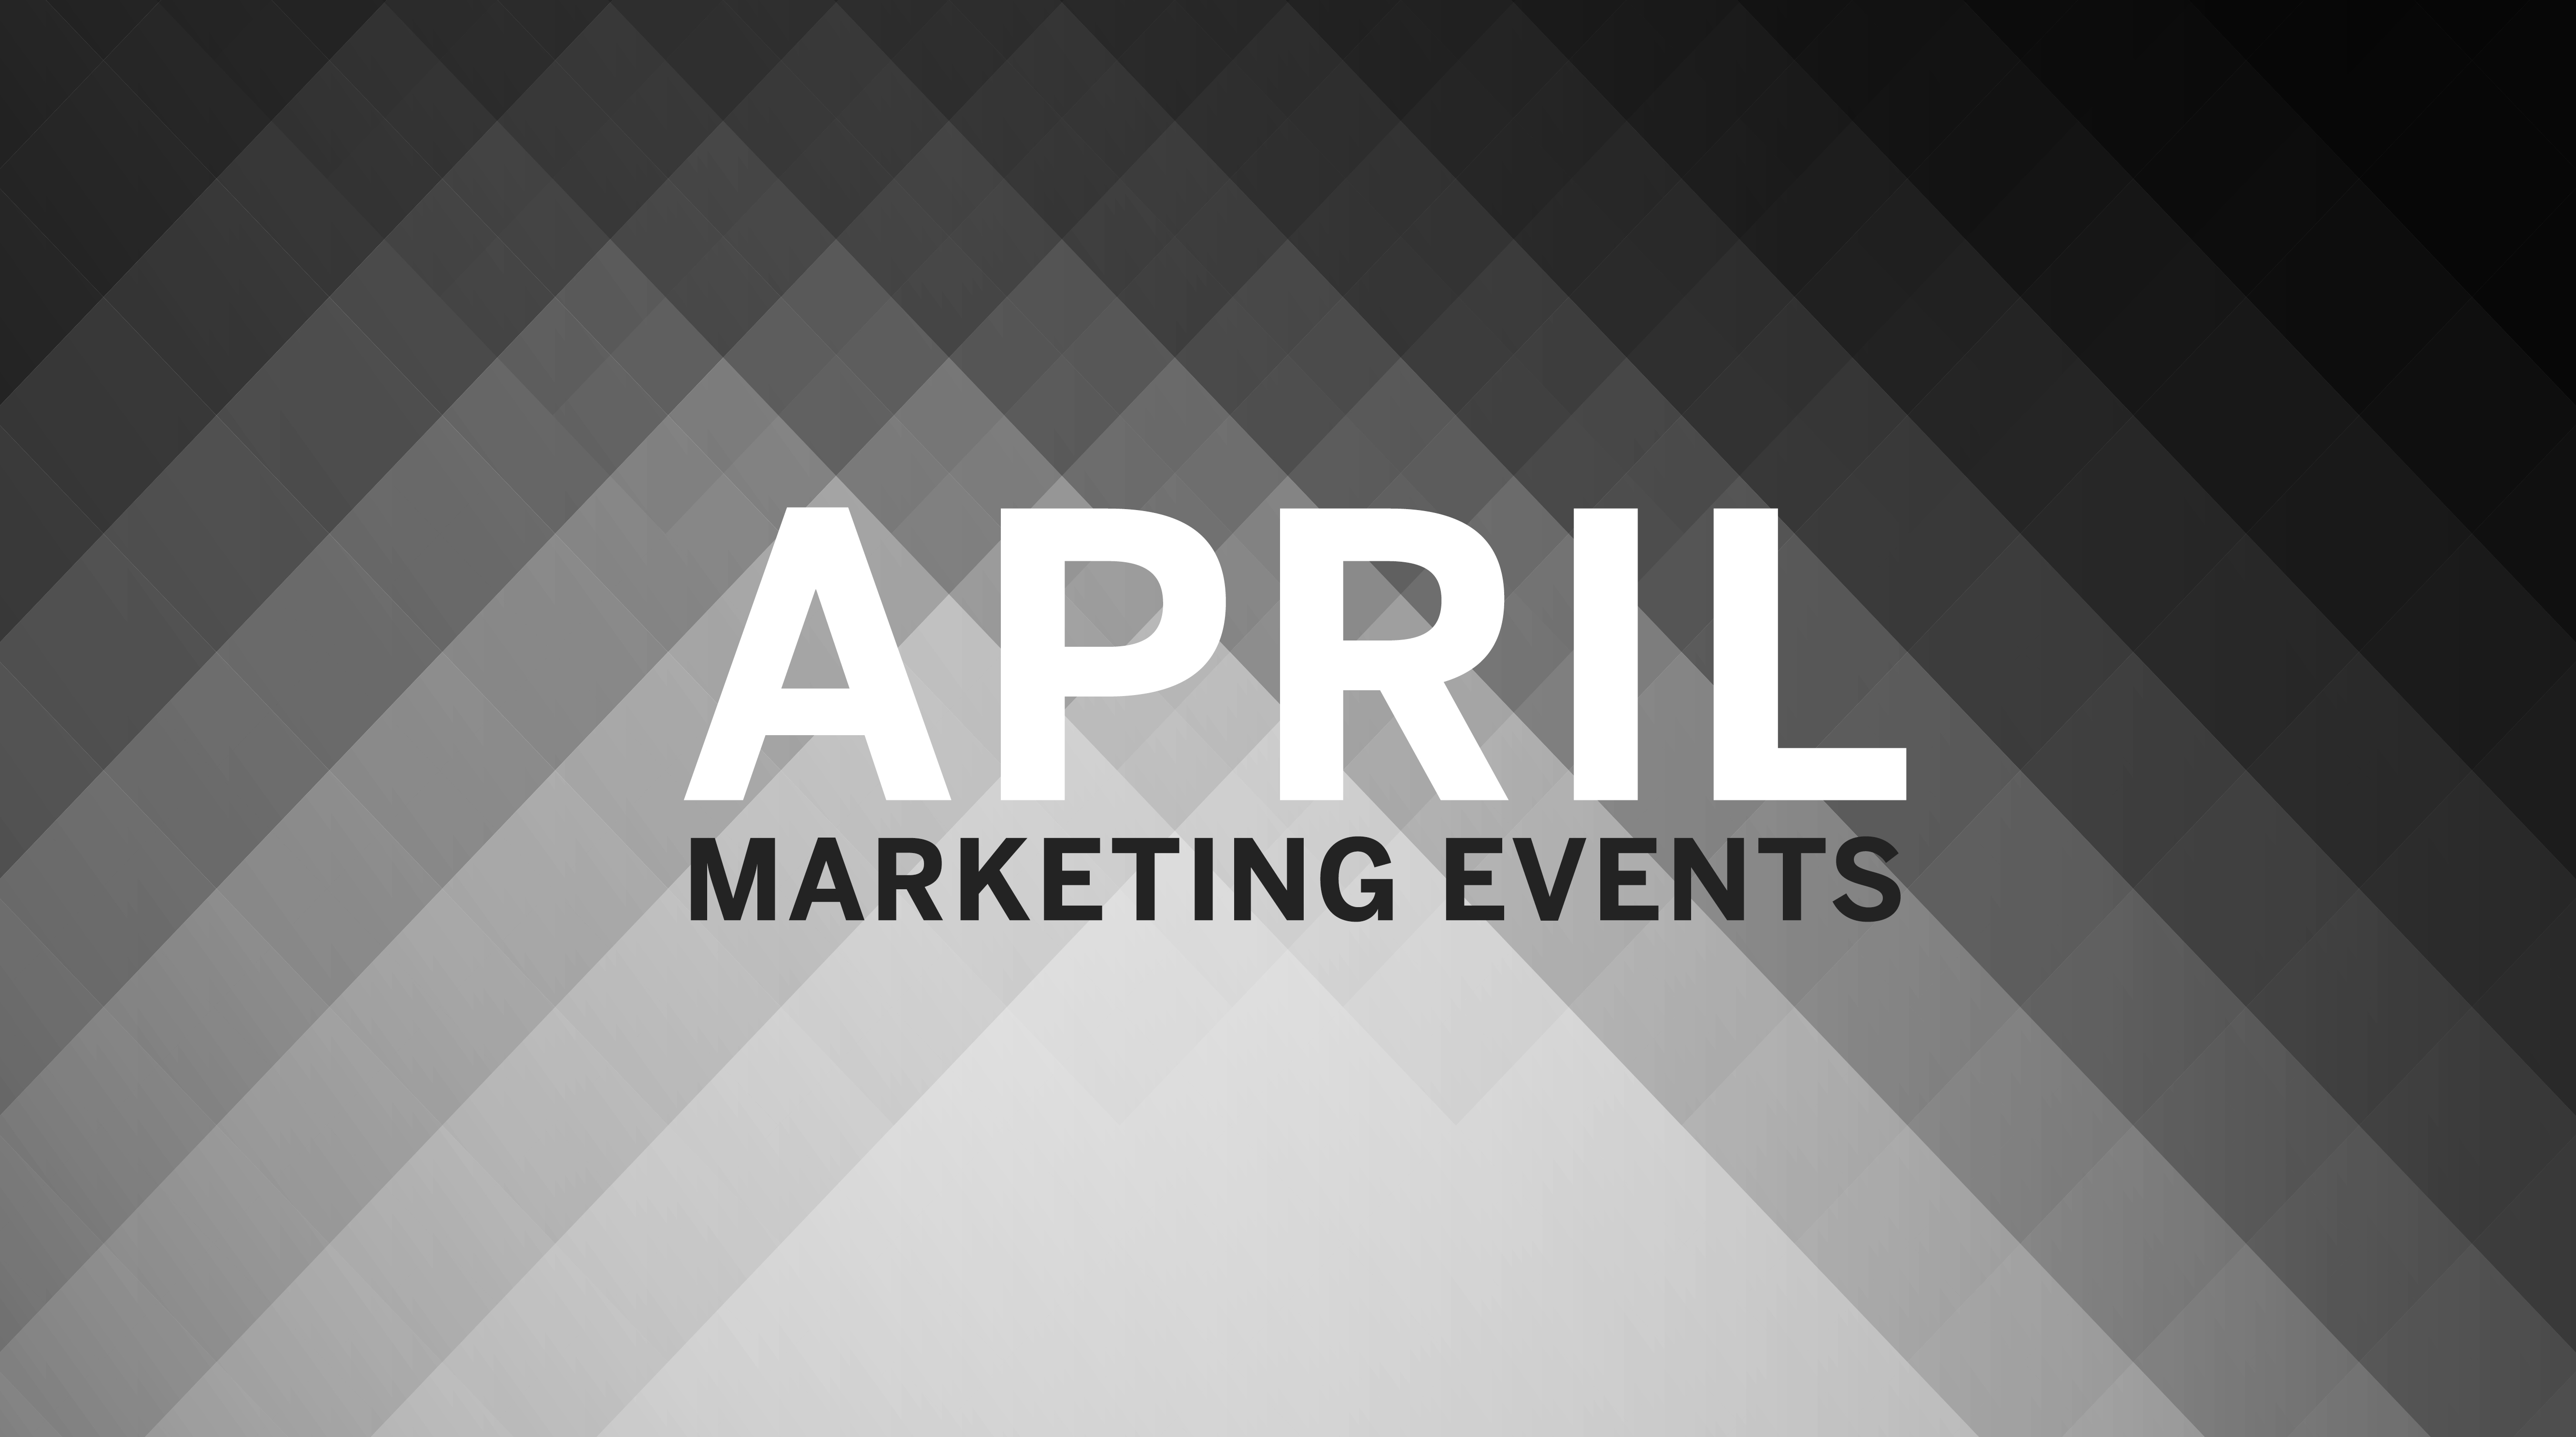 April 2016 Marketing and Design Events in St. Louis